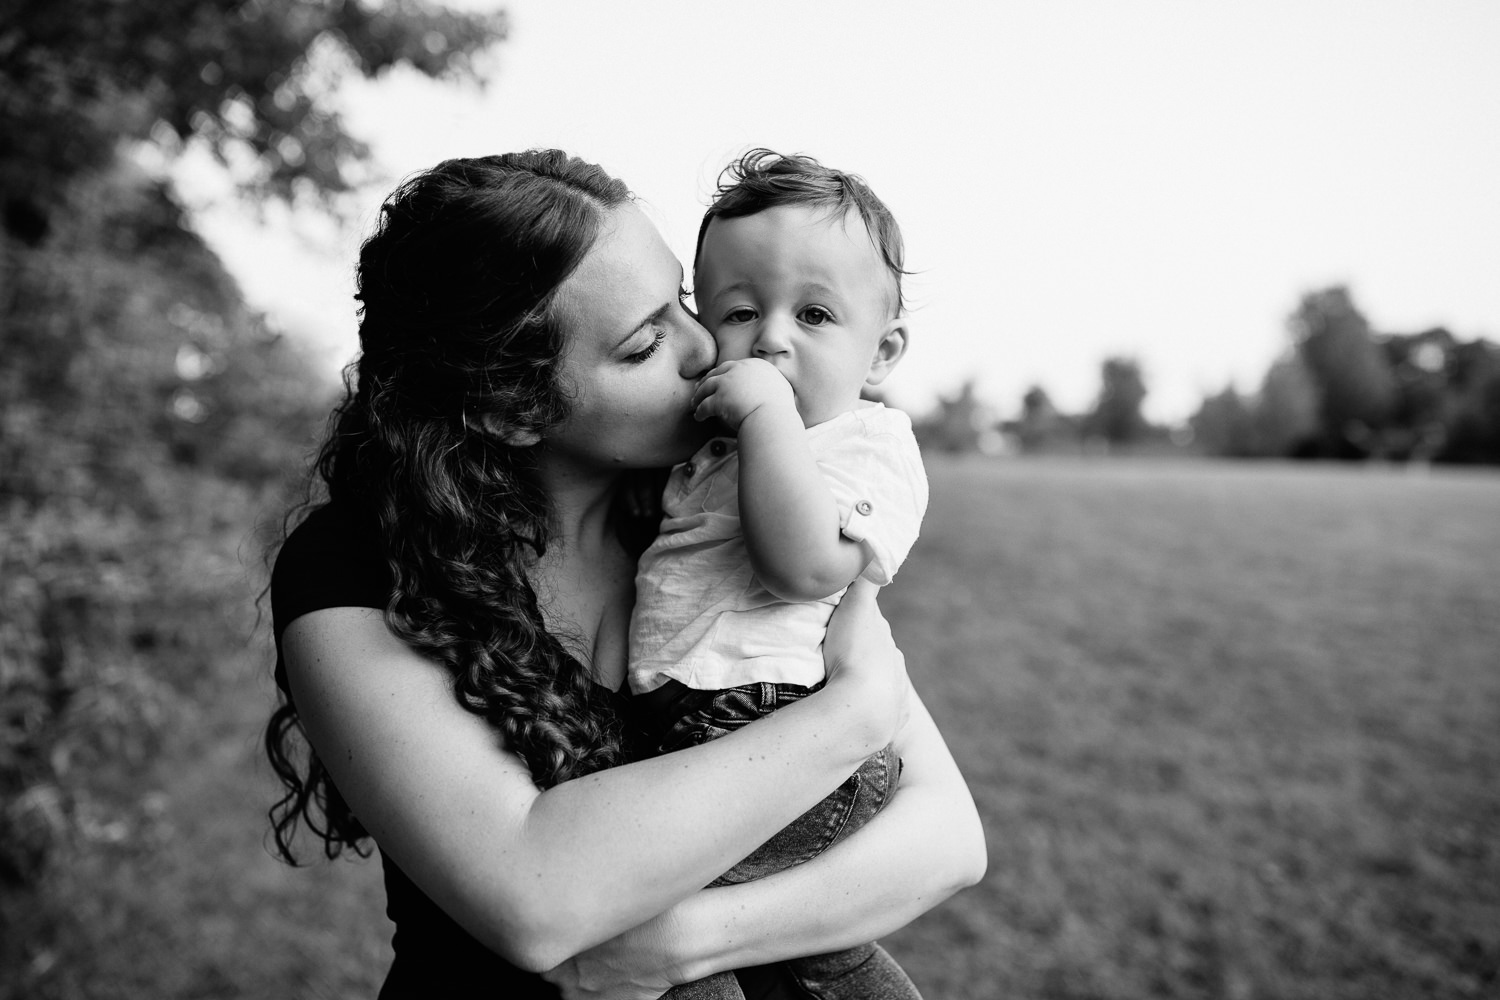 mom standing holding 9 month old baby boy with dark hair wearing white t-shirt and jeans, kissing son on cheek, boy looking at camera - GTA Lifestyle Photography